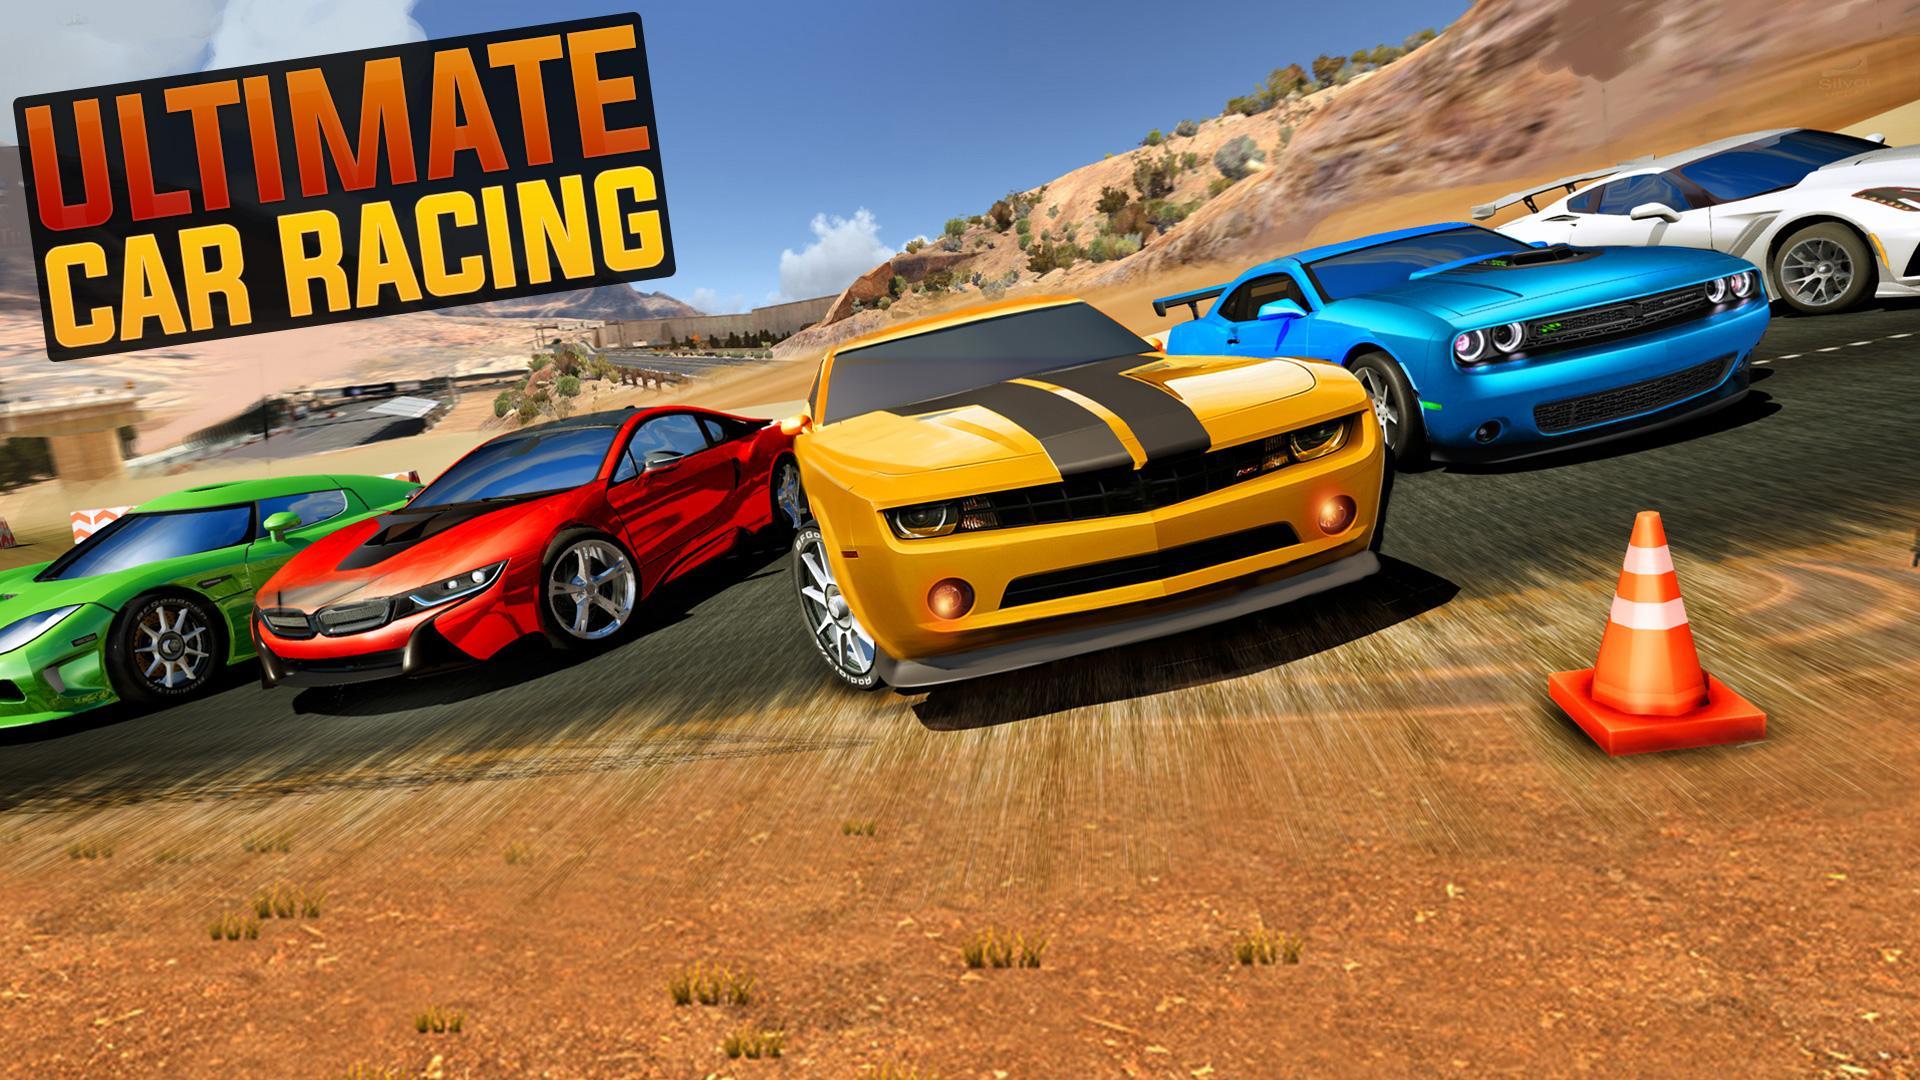 Extreme GT Car Racing : Real Car Games 2019 for Android - APK Download